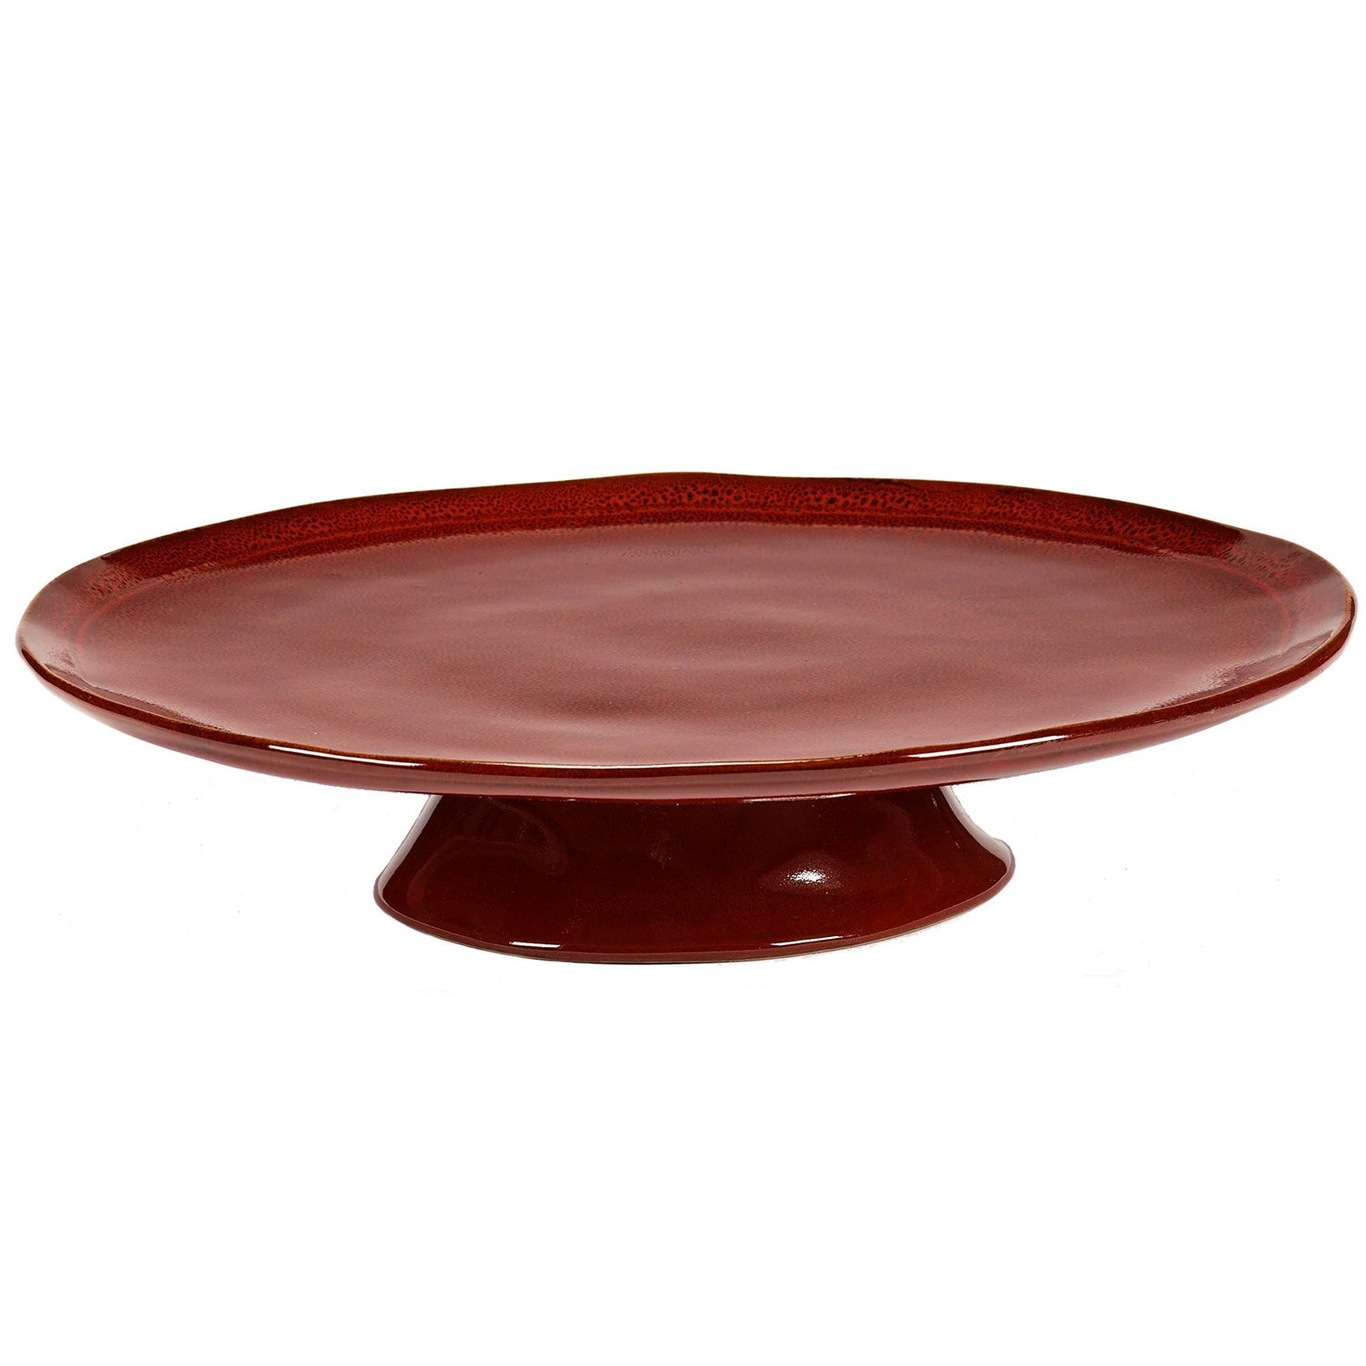 La Mère Serving Dish With Foot, Red